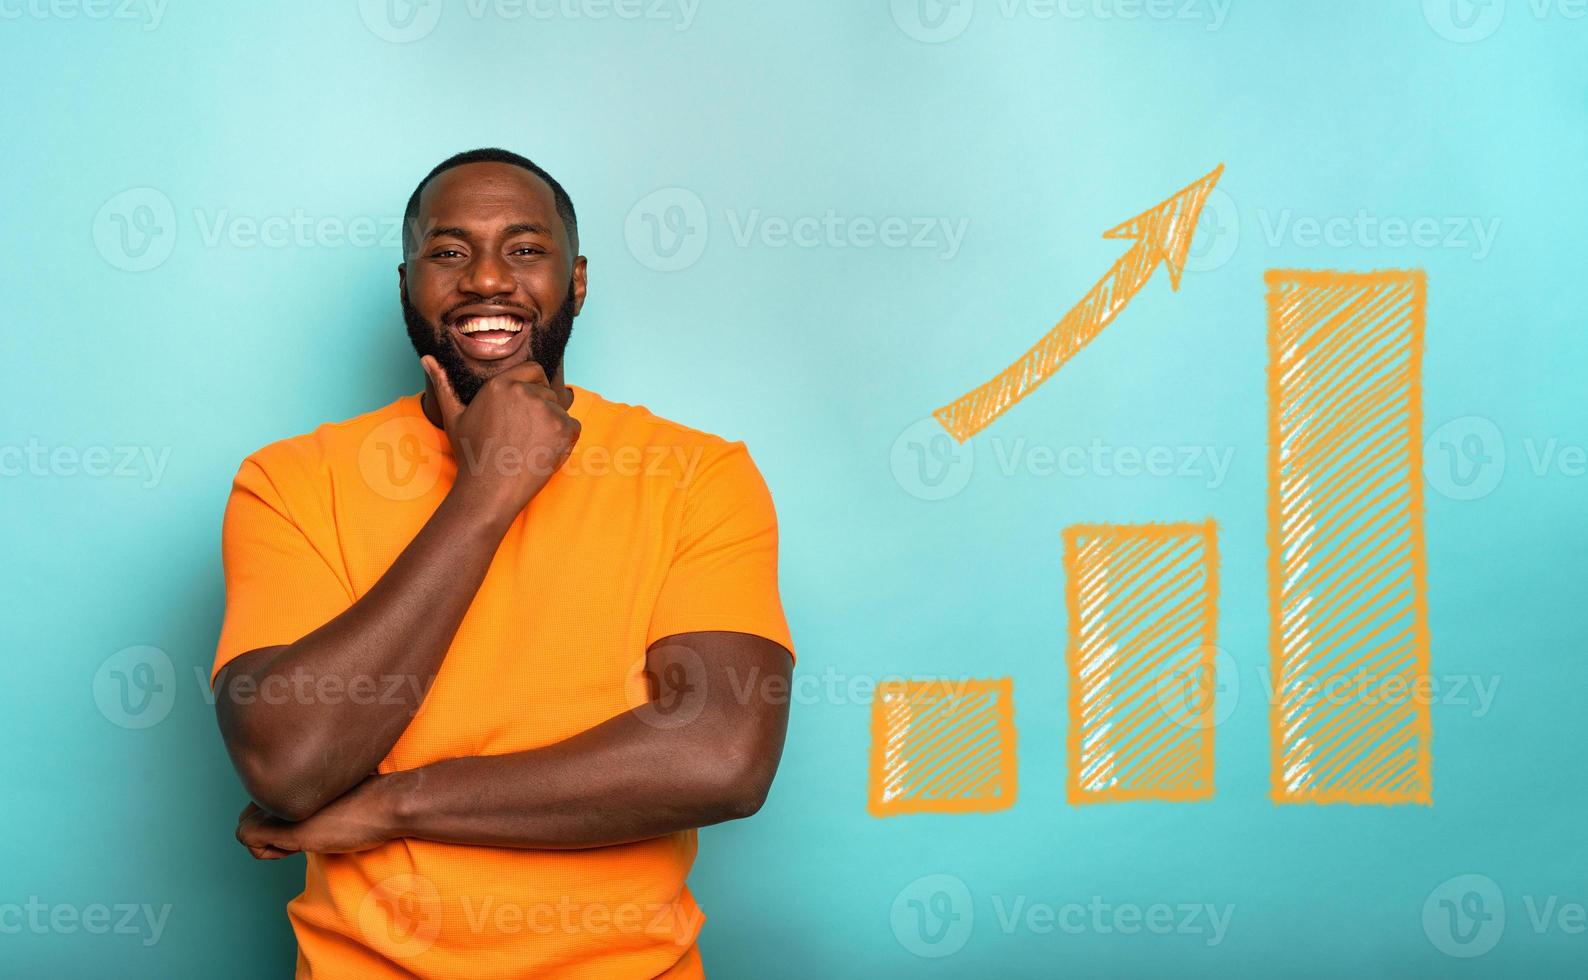 Joyful and happy man has success and increases the statistic photo